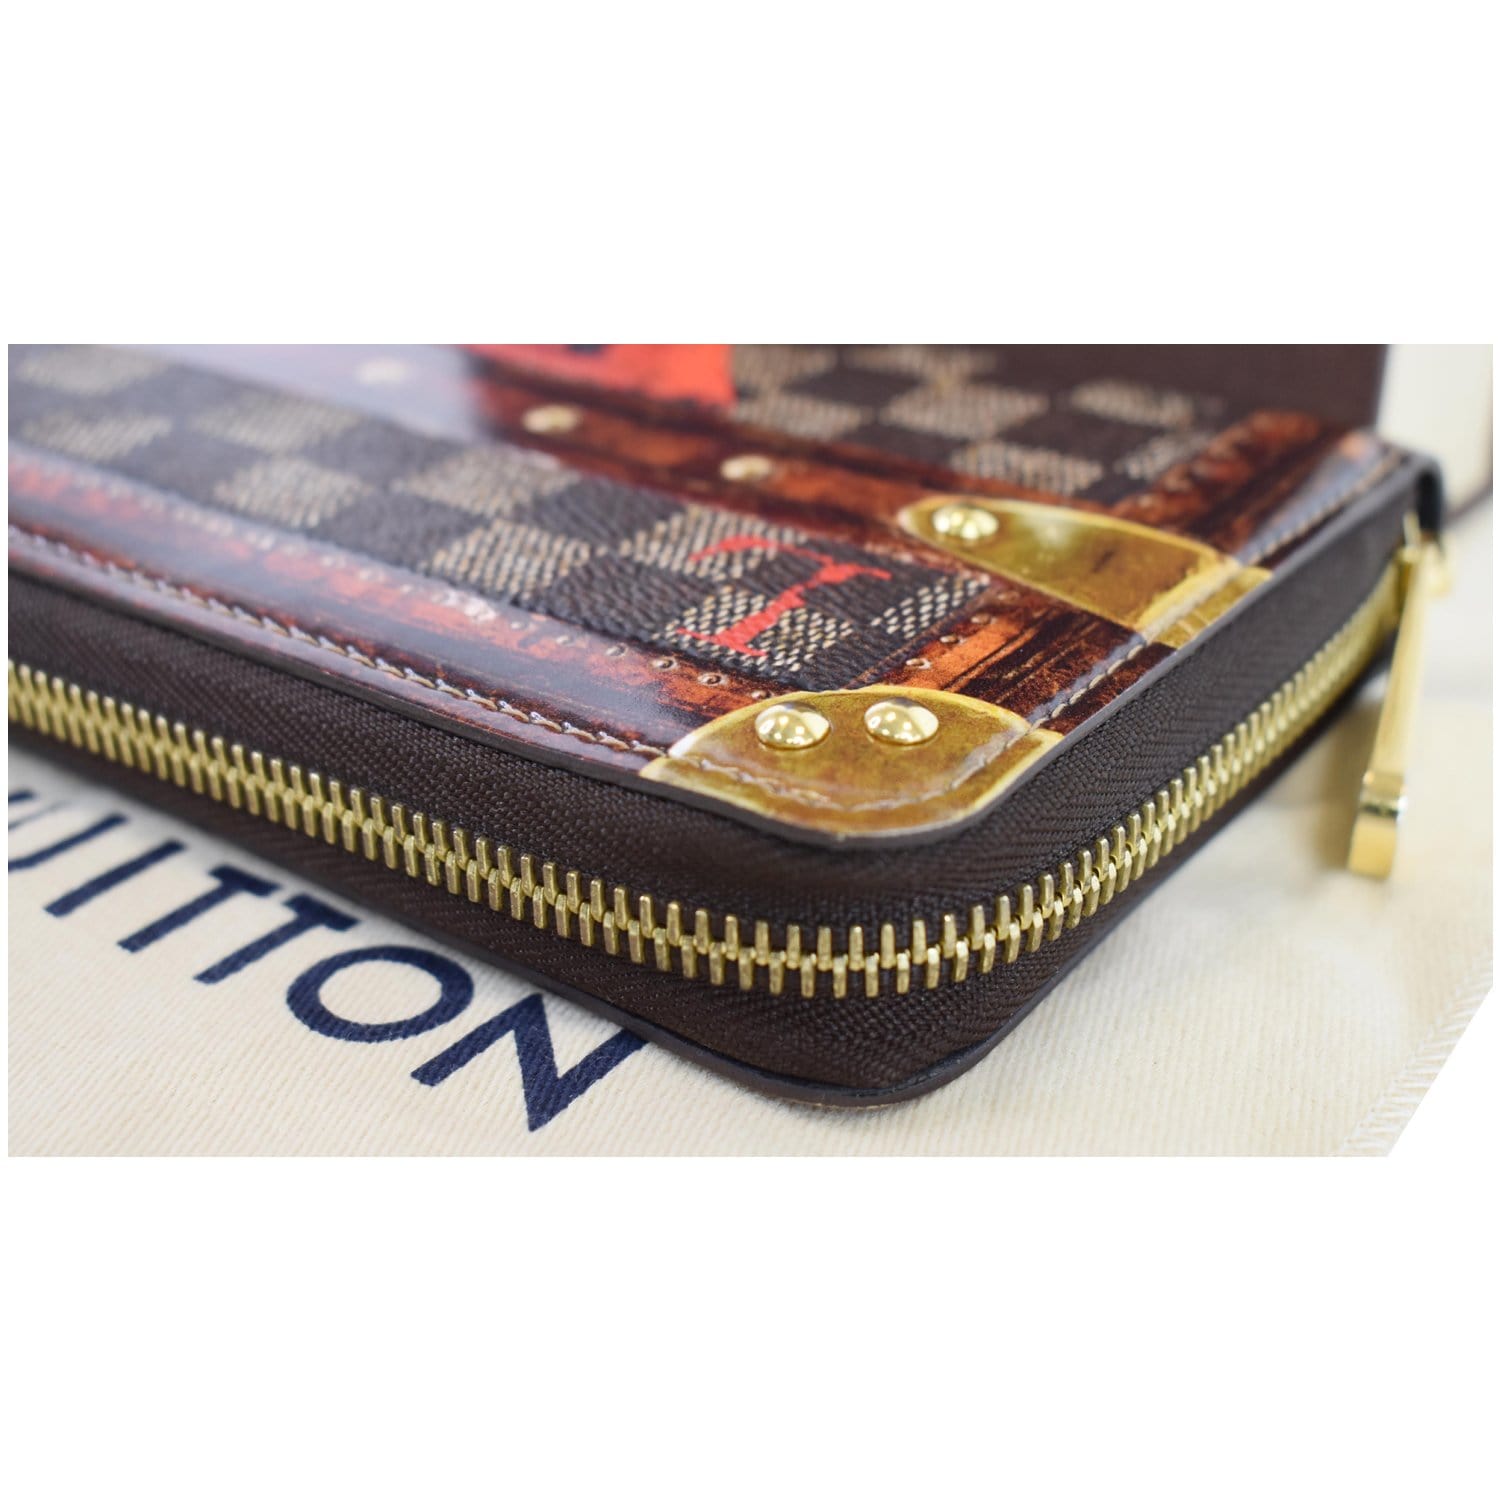 Louis vuitton long wallet black, Like new just the